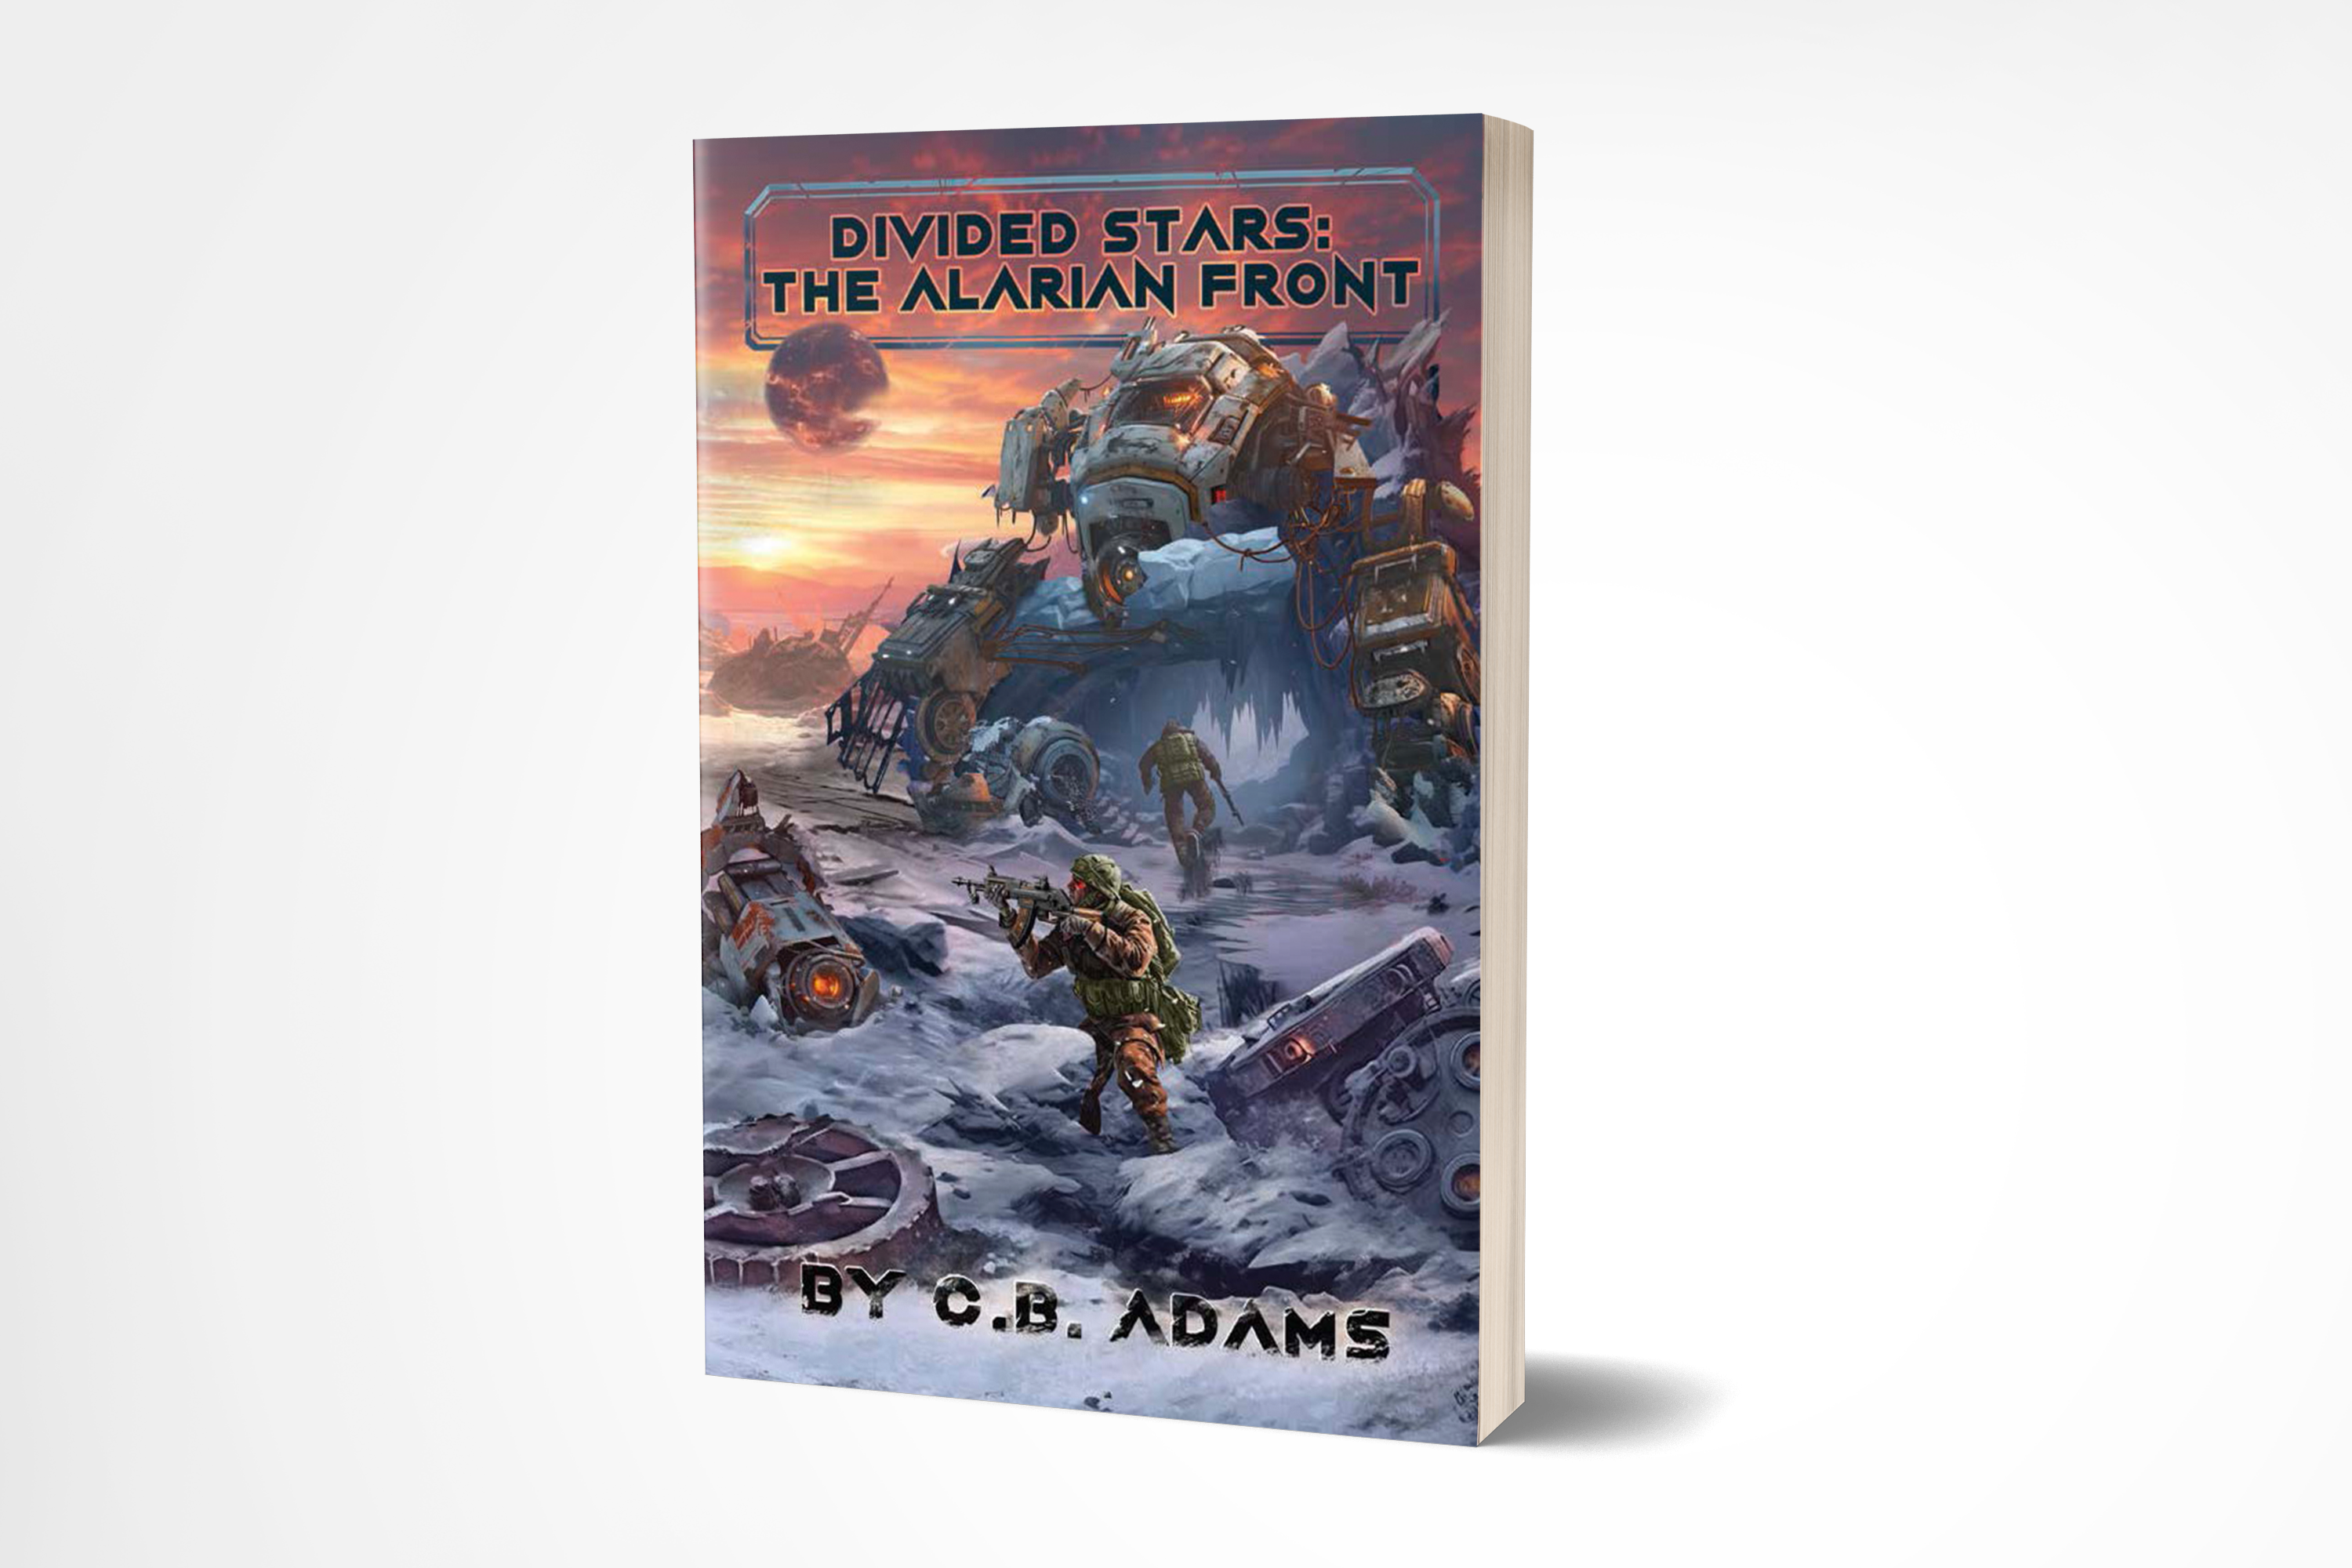 Divided Stars: The Alarian Front